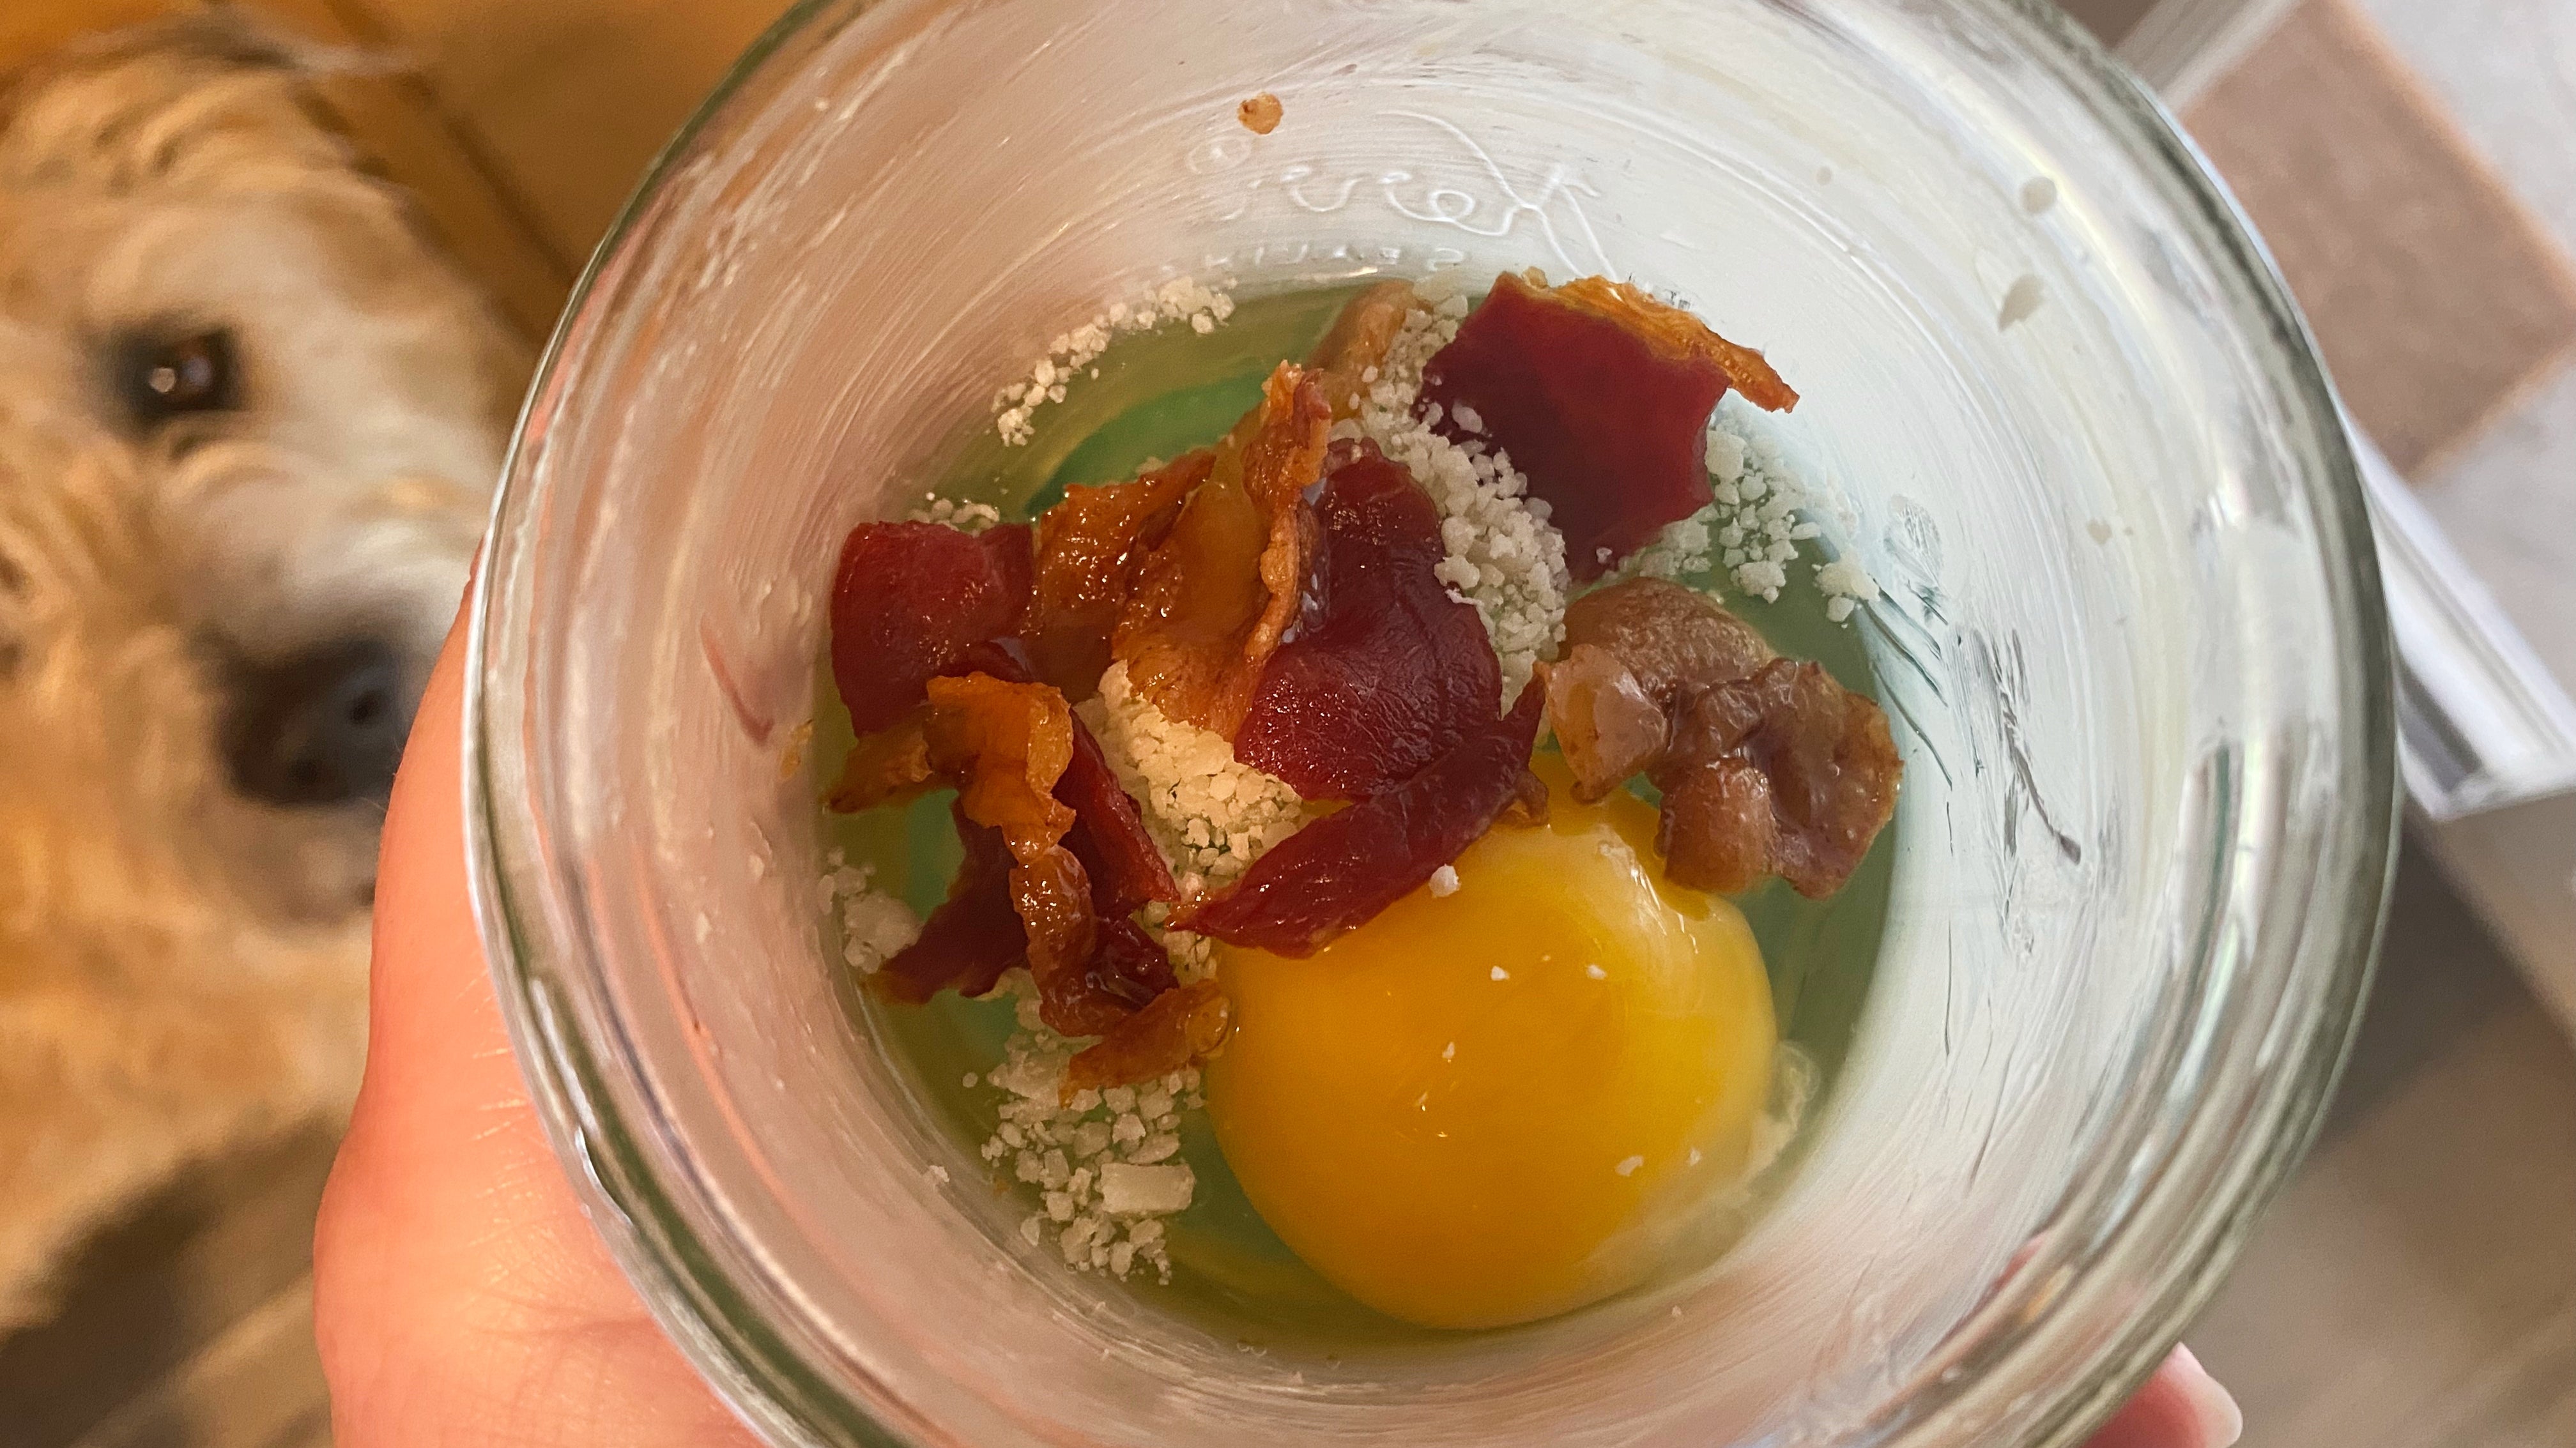 The eggs is not green; there's just a green jar lid underneath. (Photo: Claire Lower)